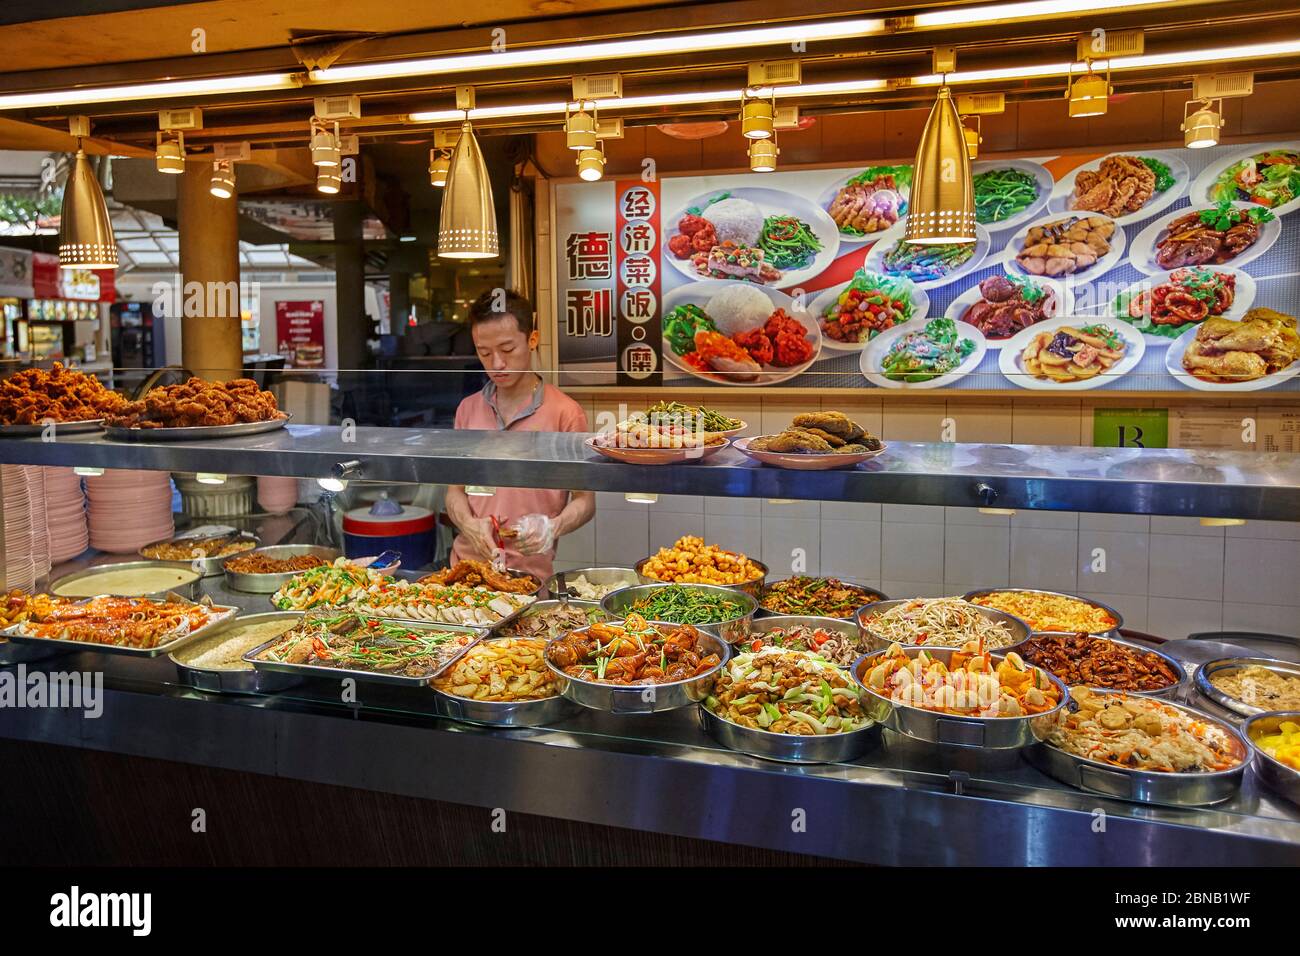 A selection of freshly cooked Asian dishes on a hawker stall in the Lau Pa Sat hawker center, Singapore. Stock Photo